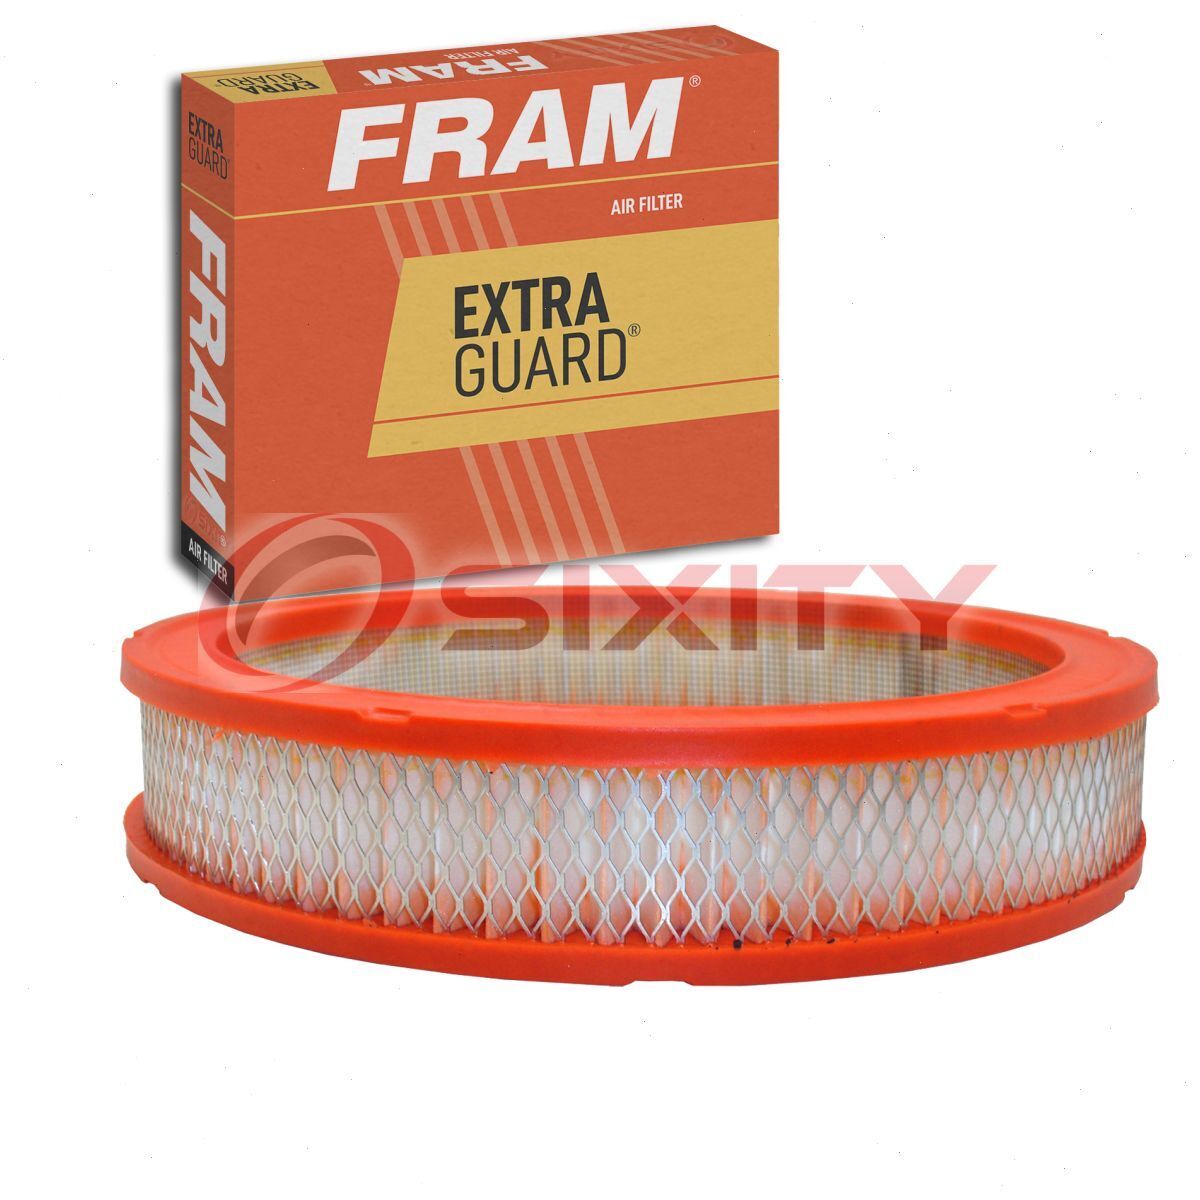 FRAM Extra Guard Air Filter for 1978-1983 Ford Fairmont Intake Inlet vk